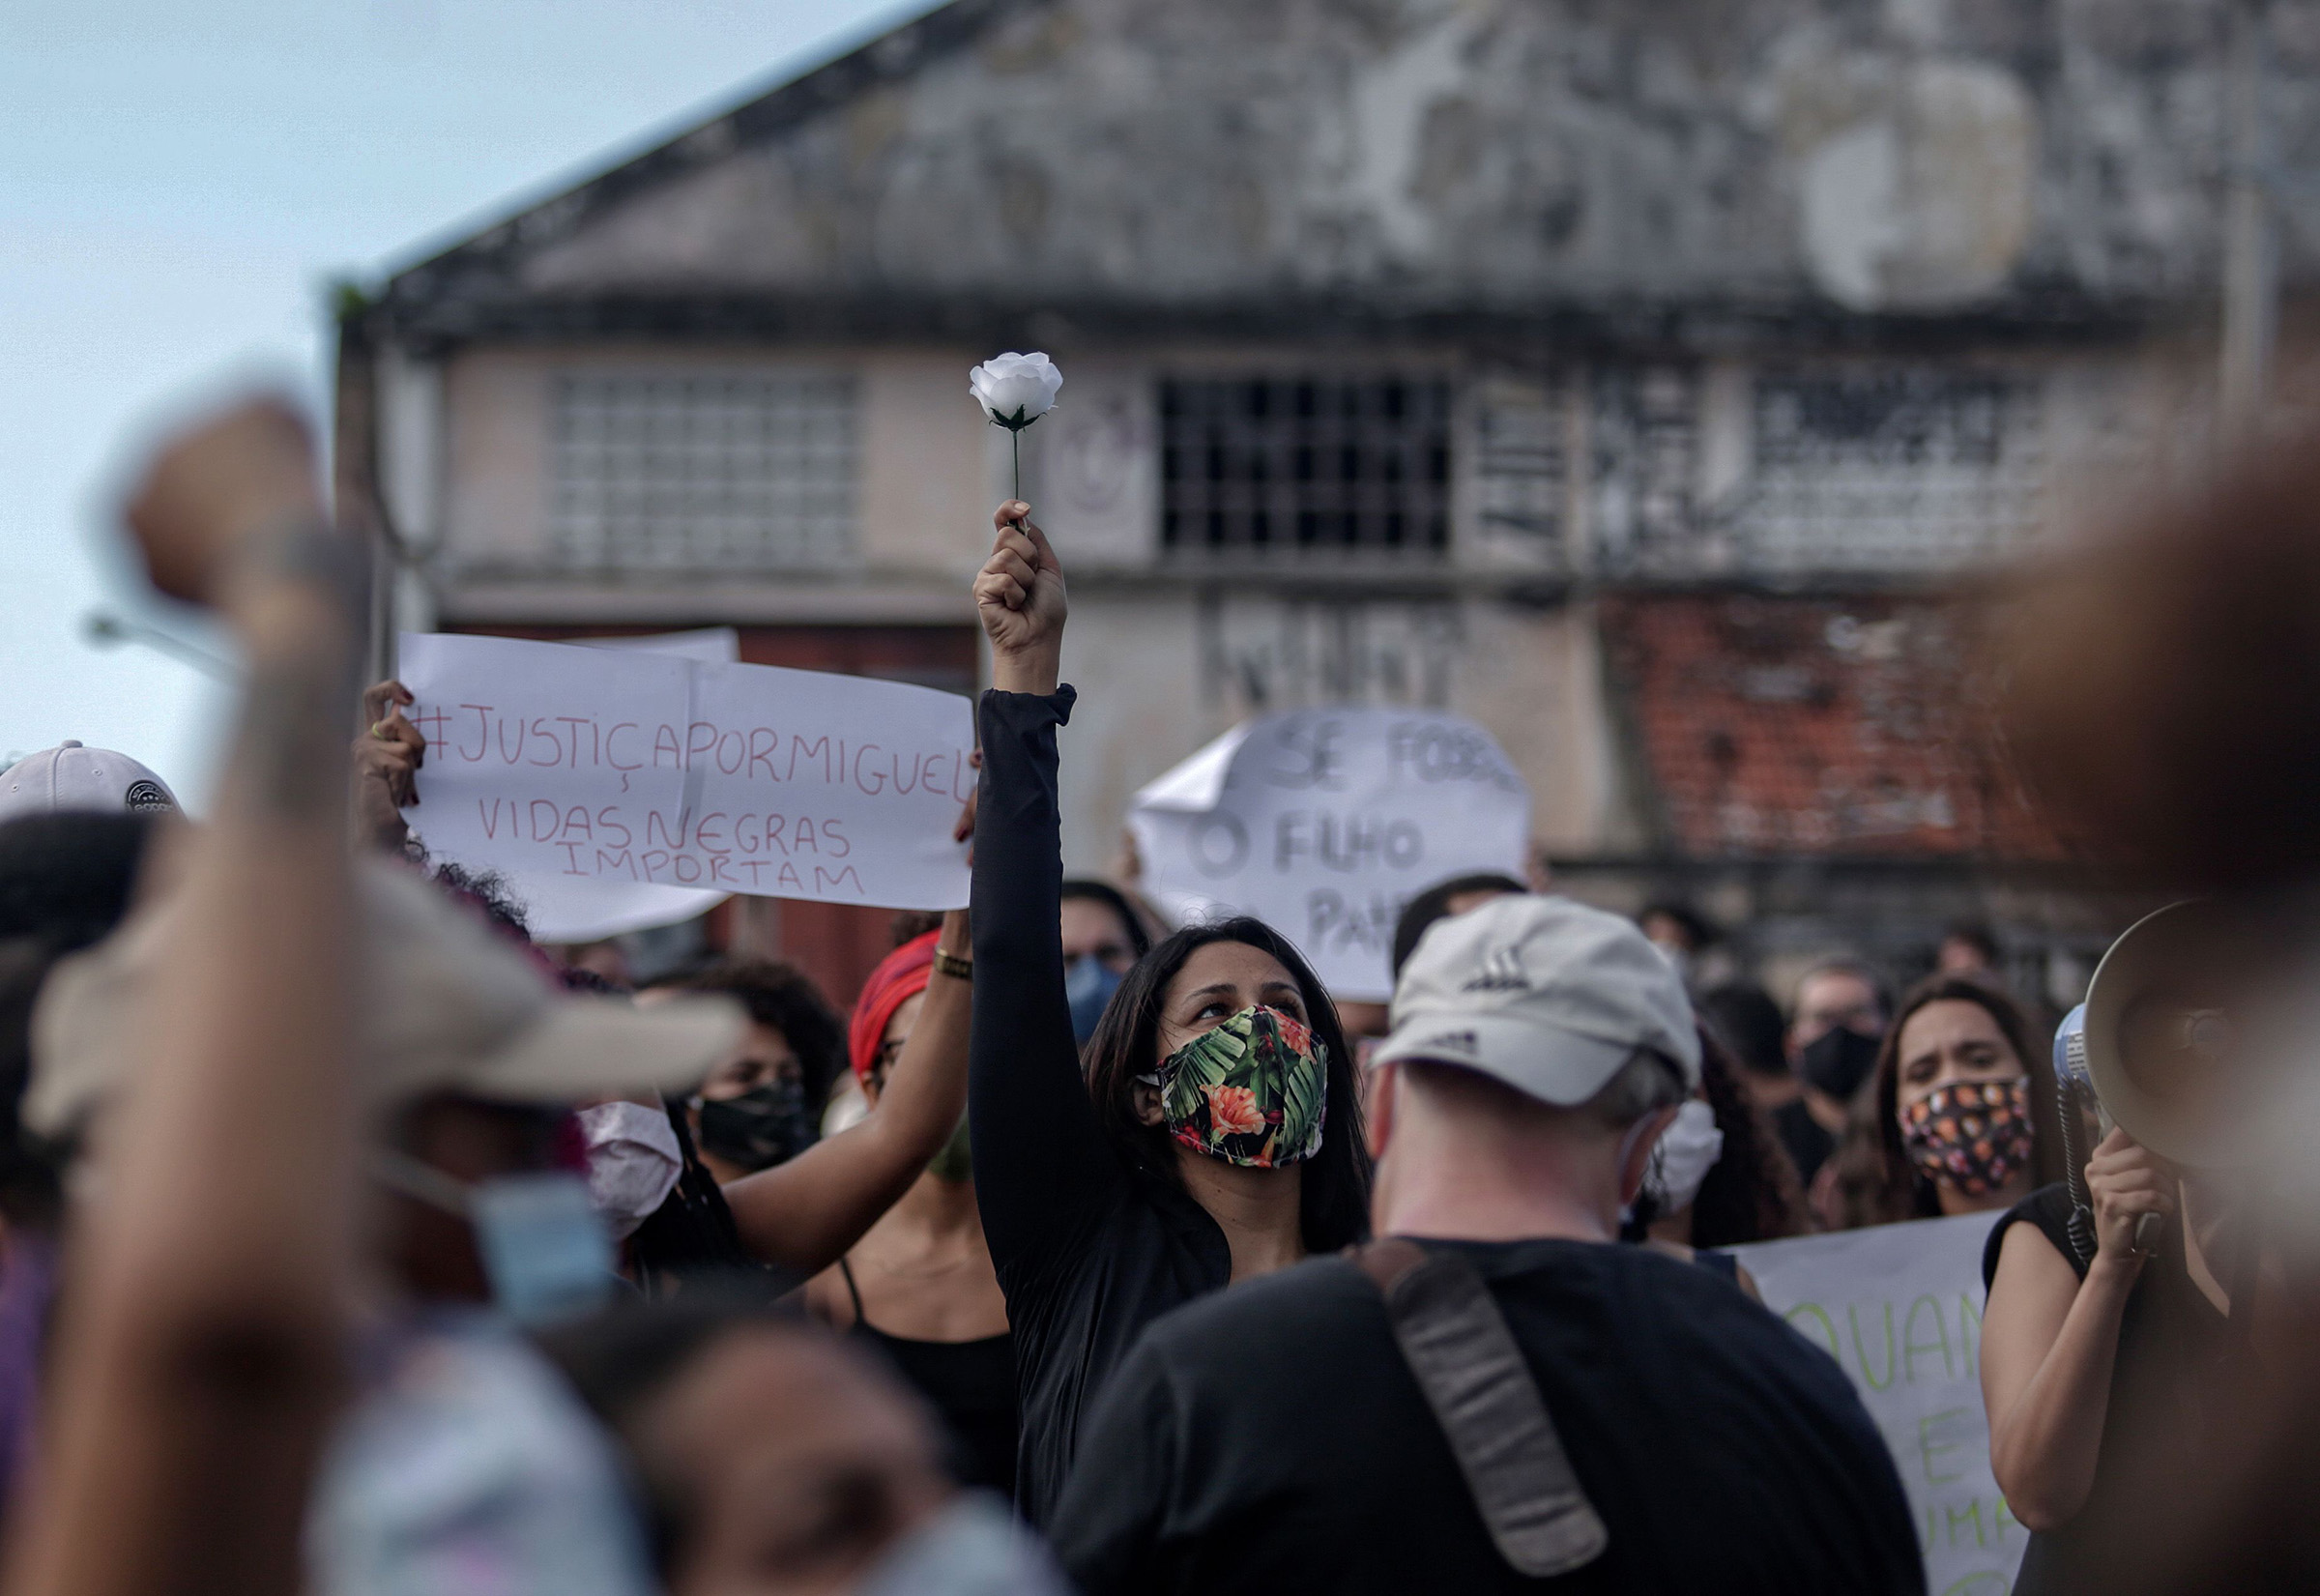 People demonstrate and demand justice for the death of five-year-old Miguel Otavio Santana da Silva, in Recife, Pernambuco State, northeastern Brazil, on June 5, 2020. (Leo Malafaia—AFP via Getty Images)